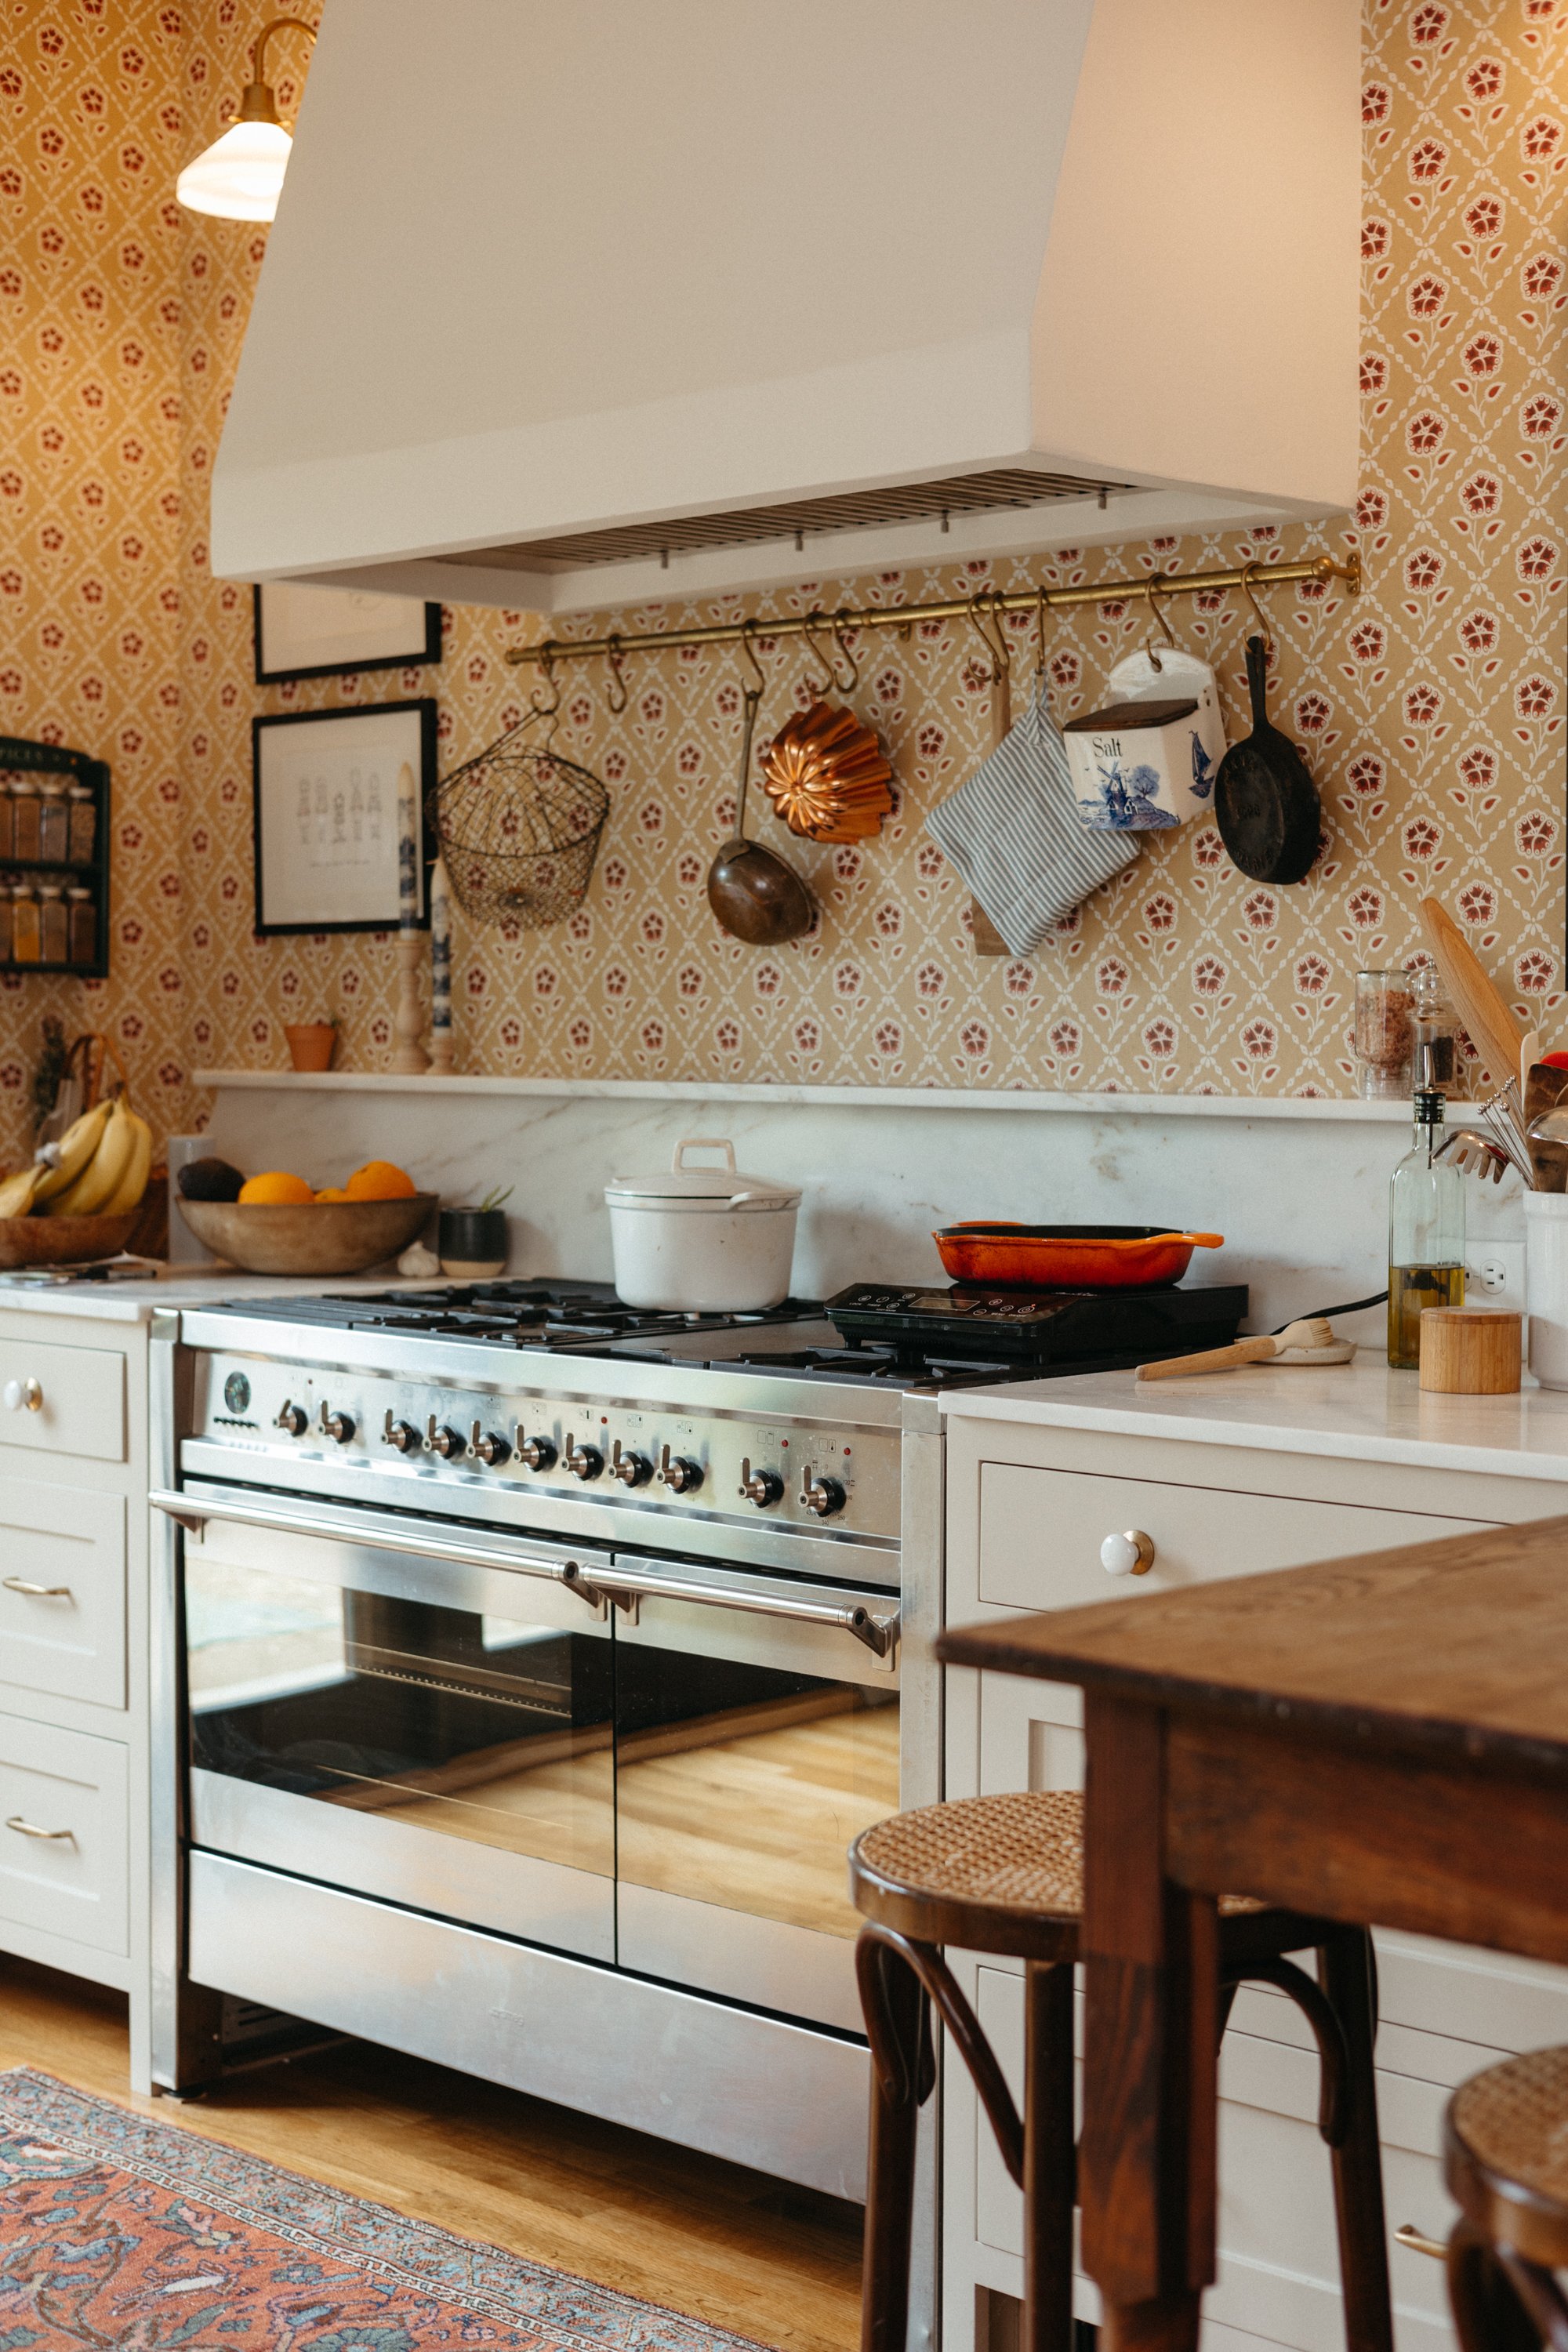 How to style a white and gold range cooker in my kitchen - Blog